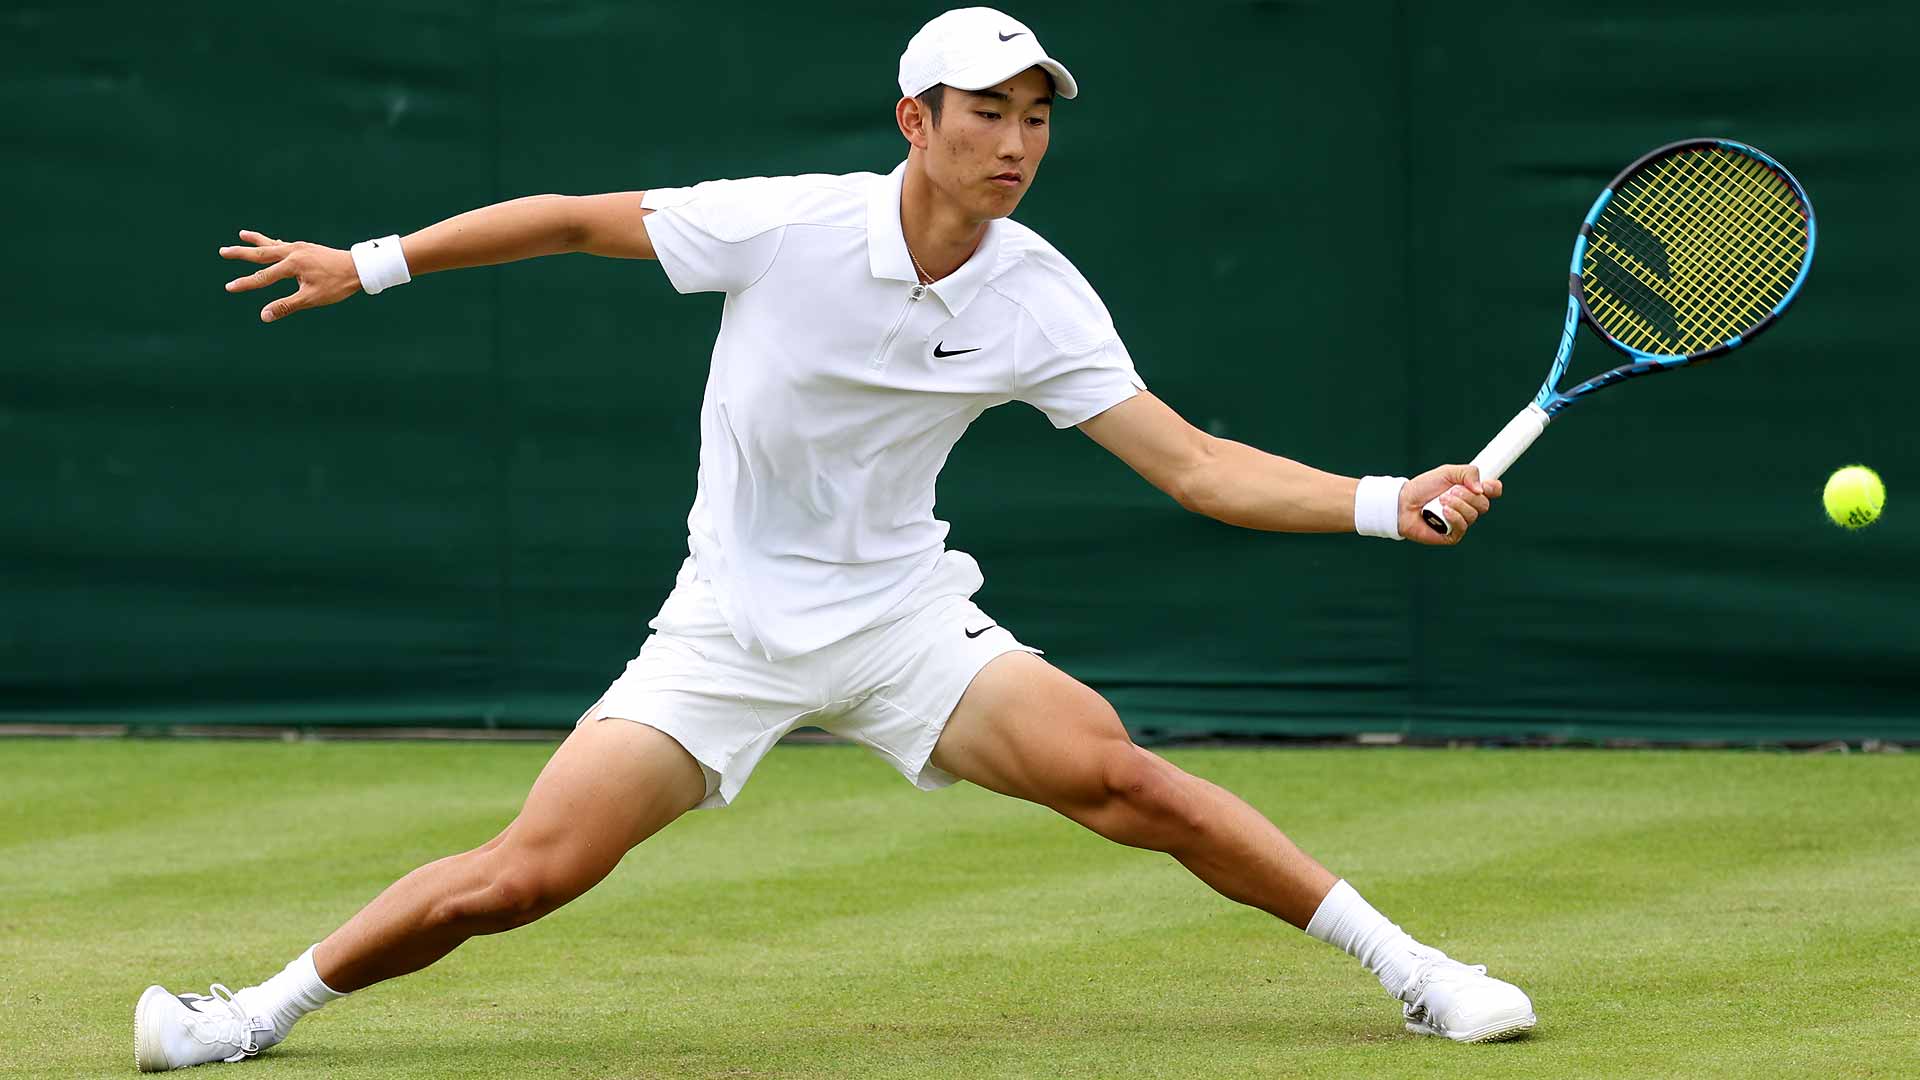 Shang Juncheng becomes the first Chinese man in the Open Era to win a match at Wimbledon.